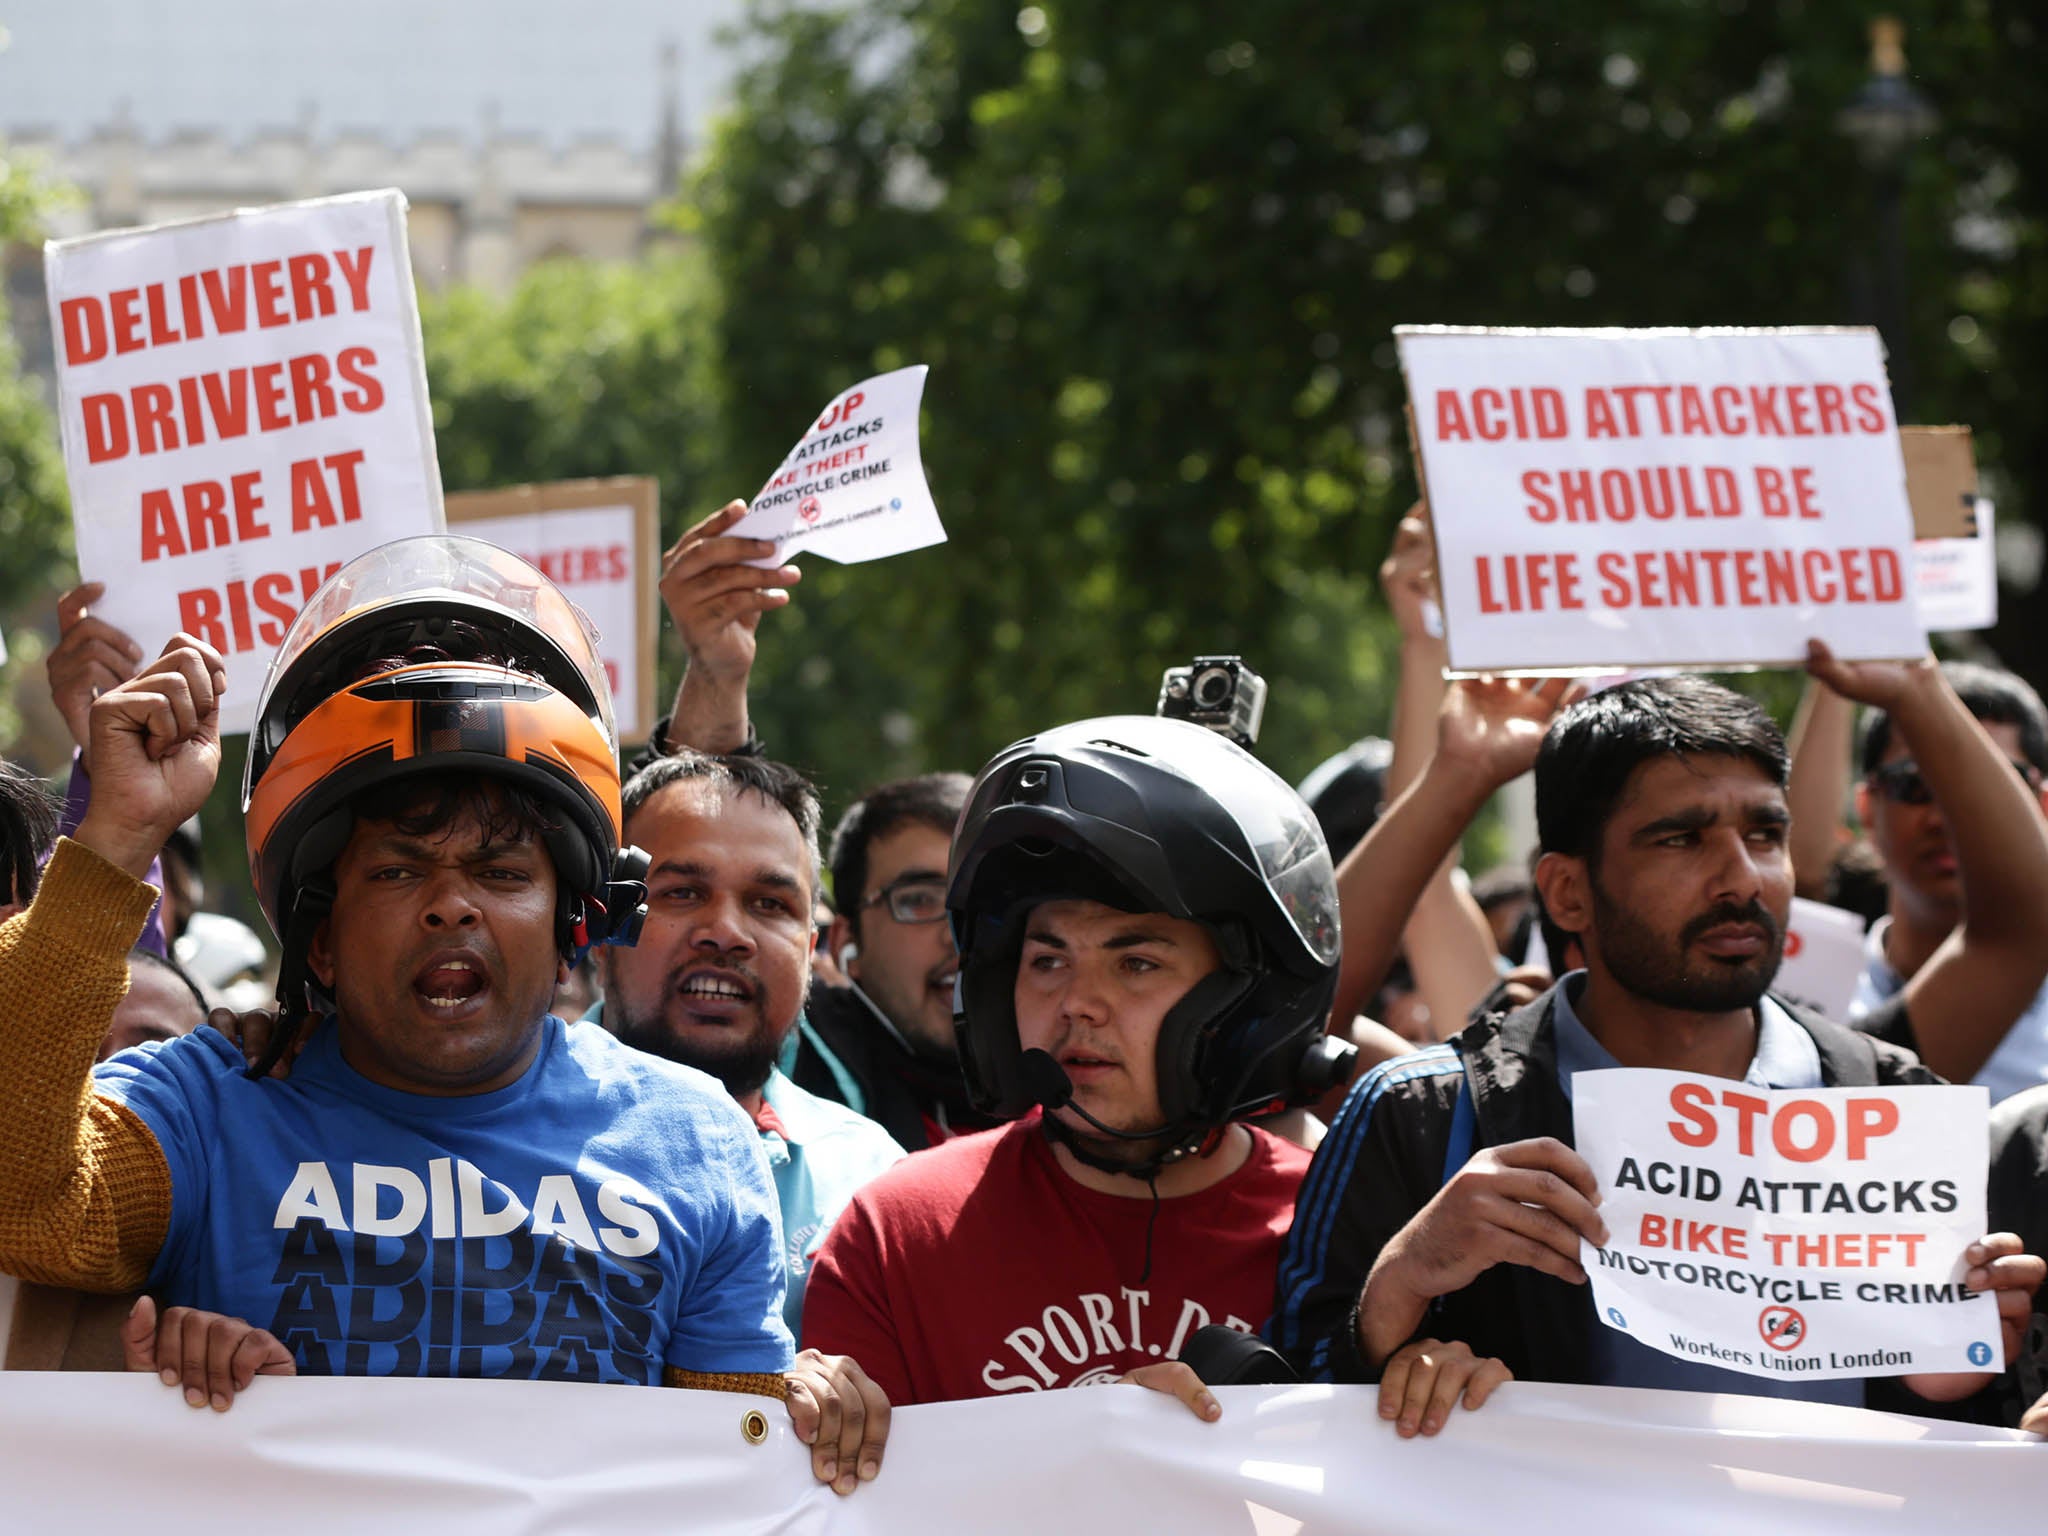 Delivery riders demonstrate in Parliament Square after a spate of acid attacks in the summer